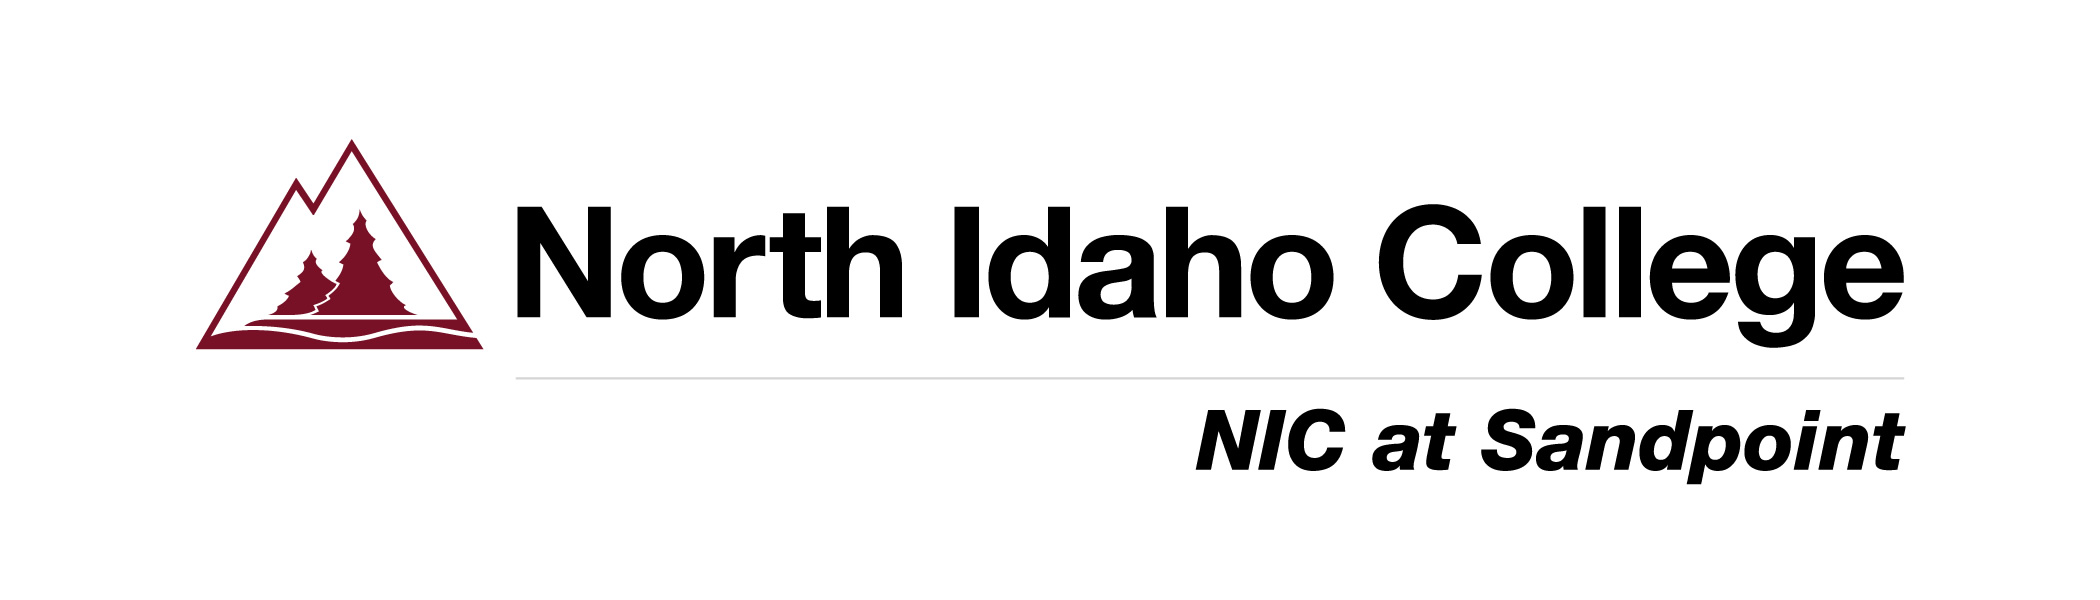 NIC Logo with Sandpoint and no address